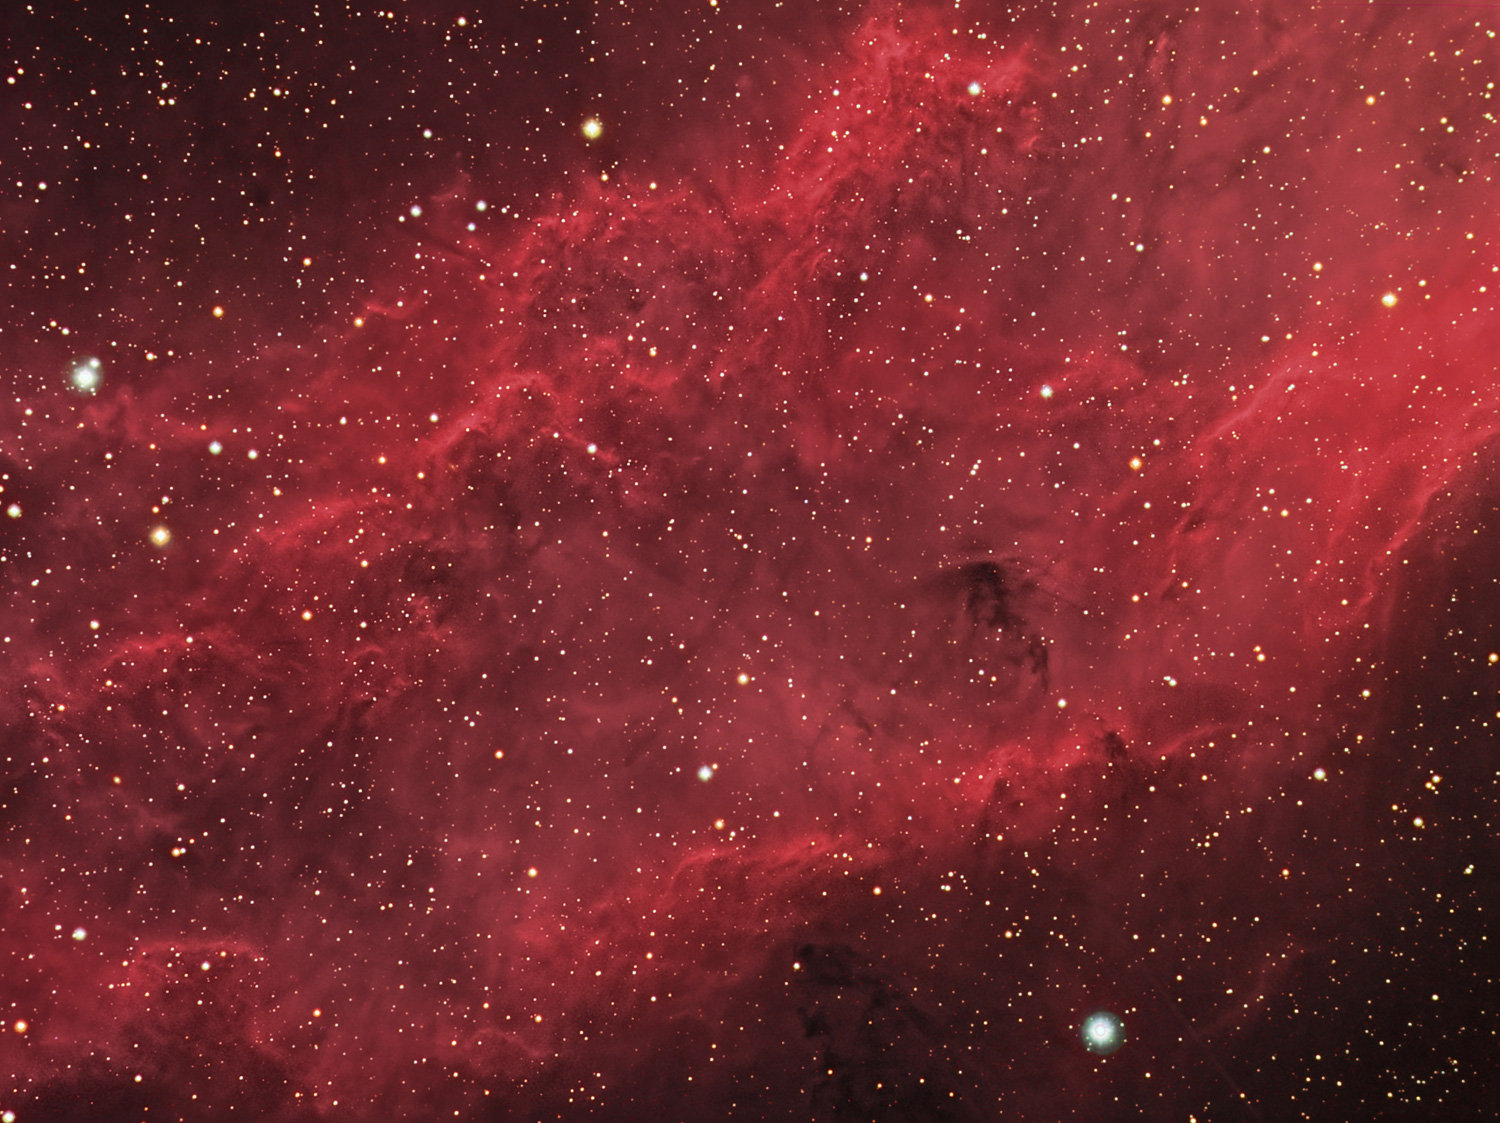 20110317_ngc1499_rgb-ccdstack-decon-for-stars-rgb-ps2-v2-with-ha-scaled.jpg